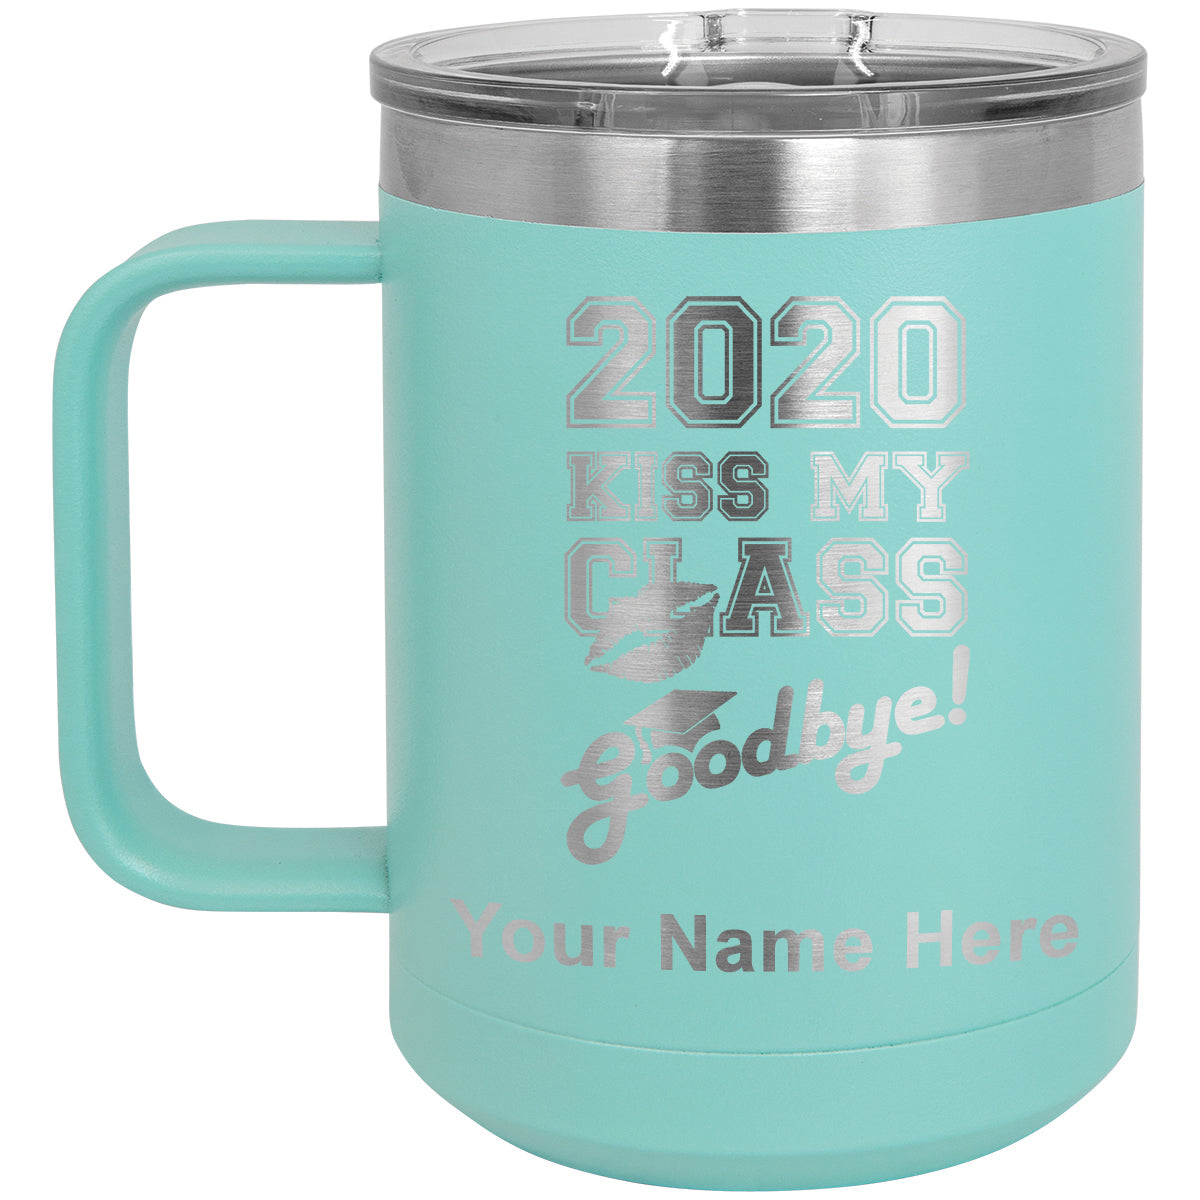 15oz Vacuum Insulated Coffee Mug, Kiss My Class Goodbye 2020, 2021, 2022, 2023 2024, 2025, Personalized Engraving Included